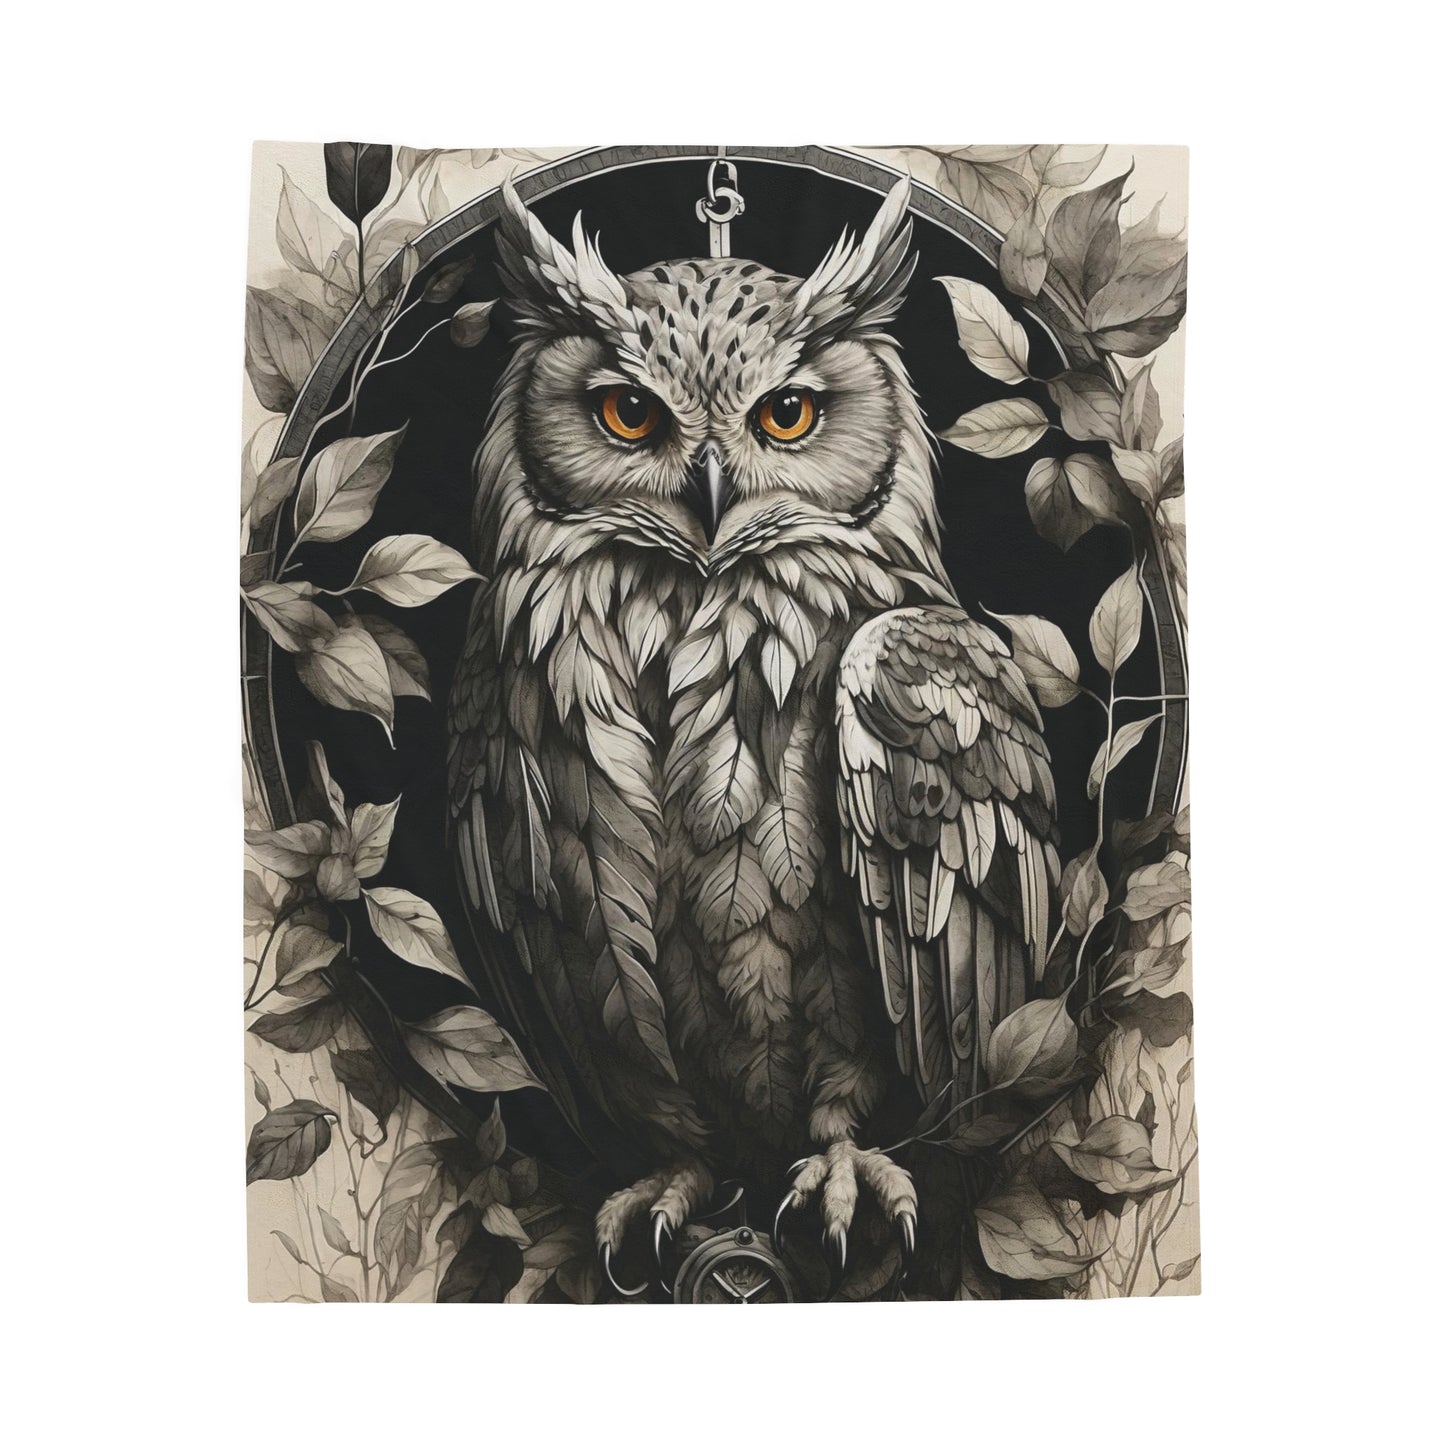 Gray Owl Velveteen Plush Blanket with Compass and Leaves